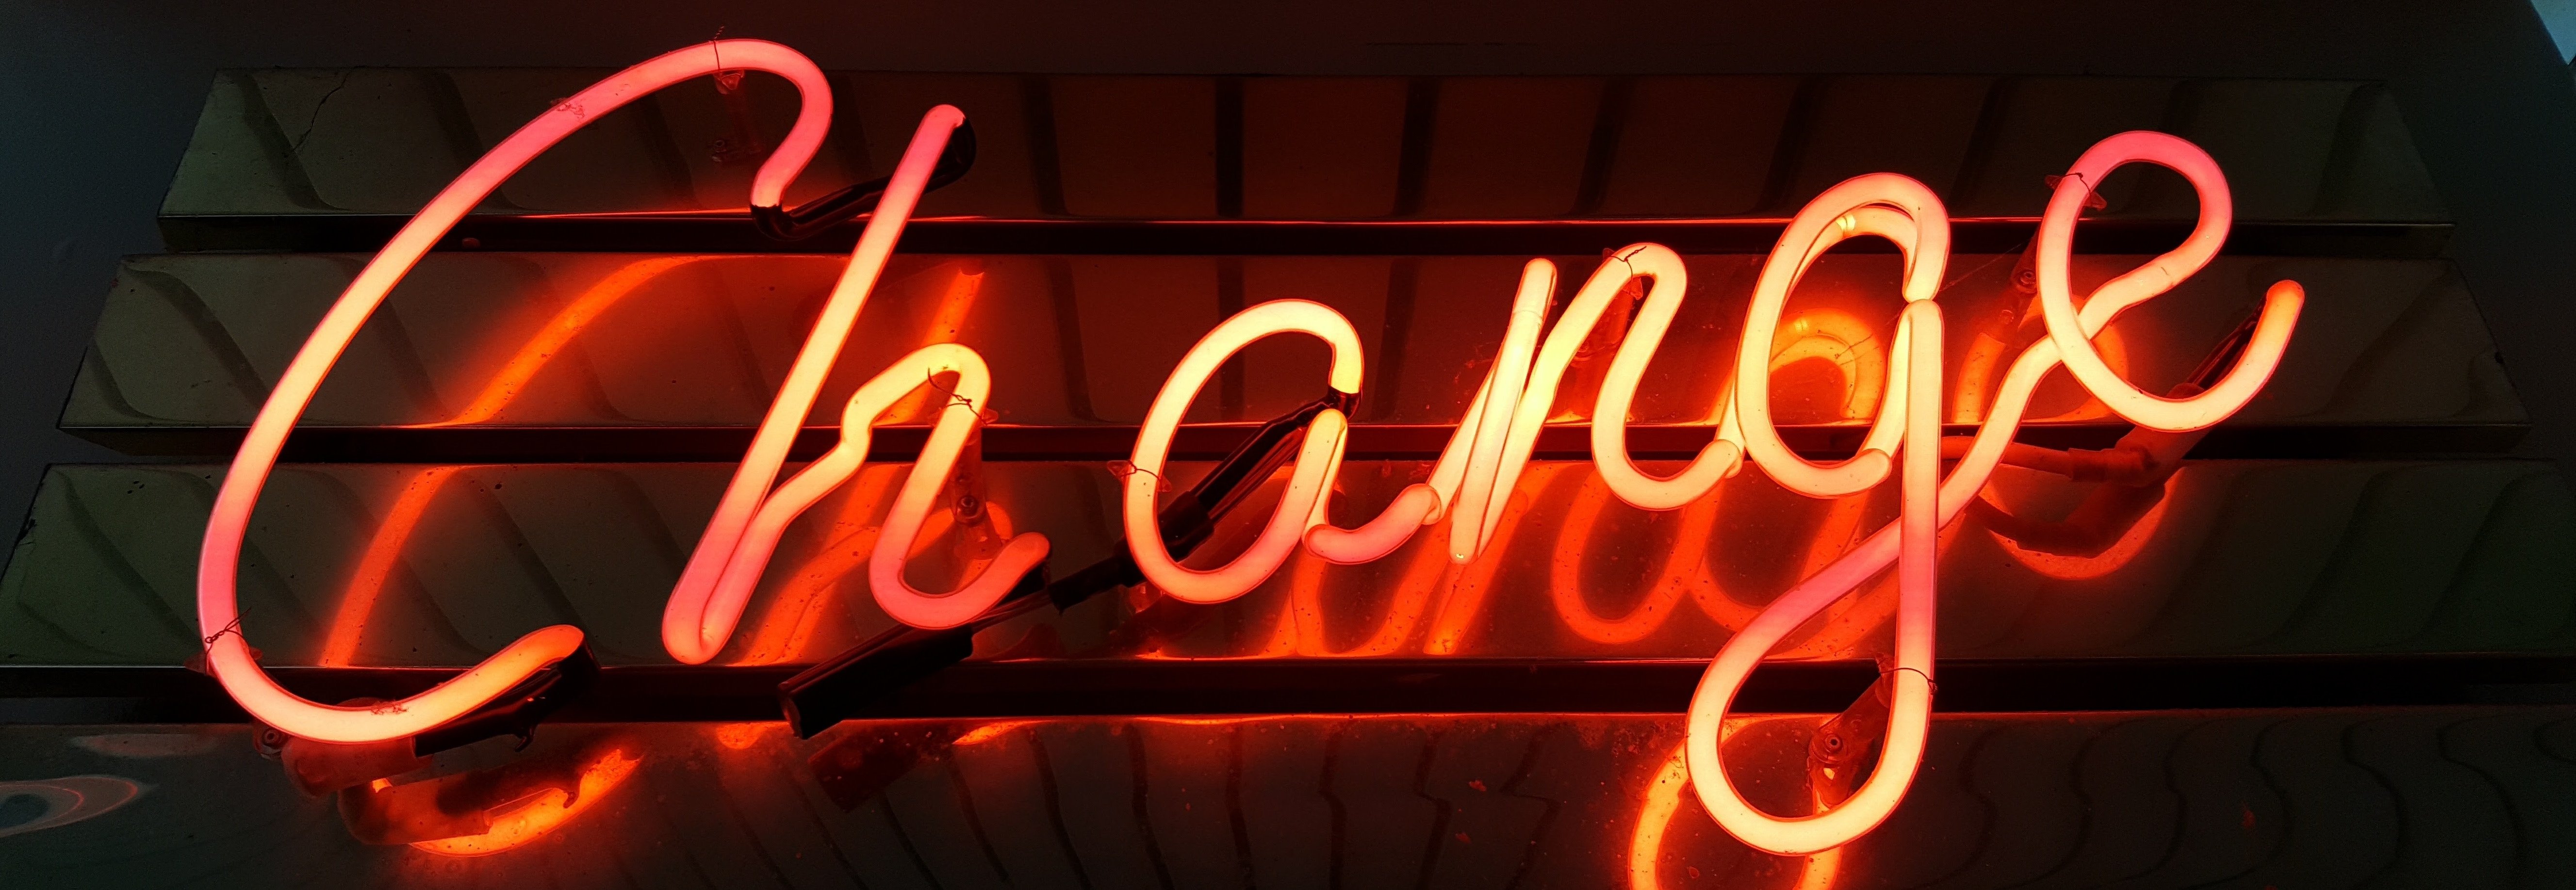 neon sign with the word change